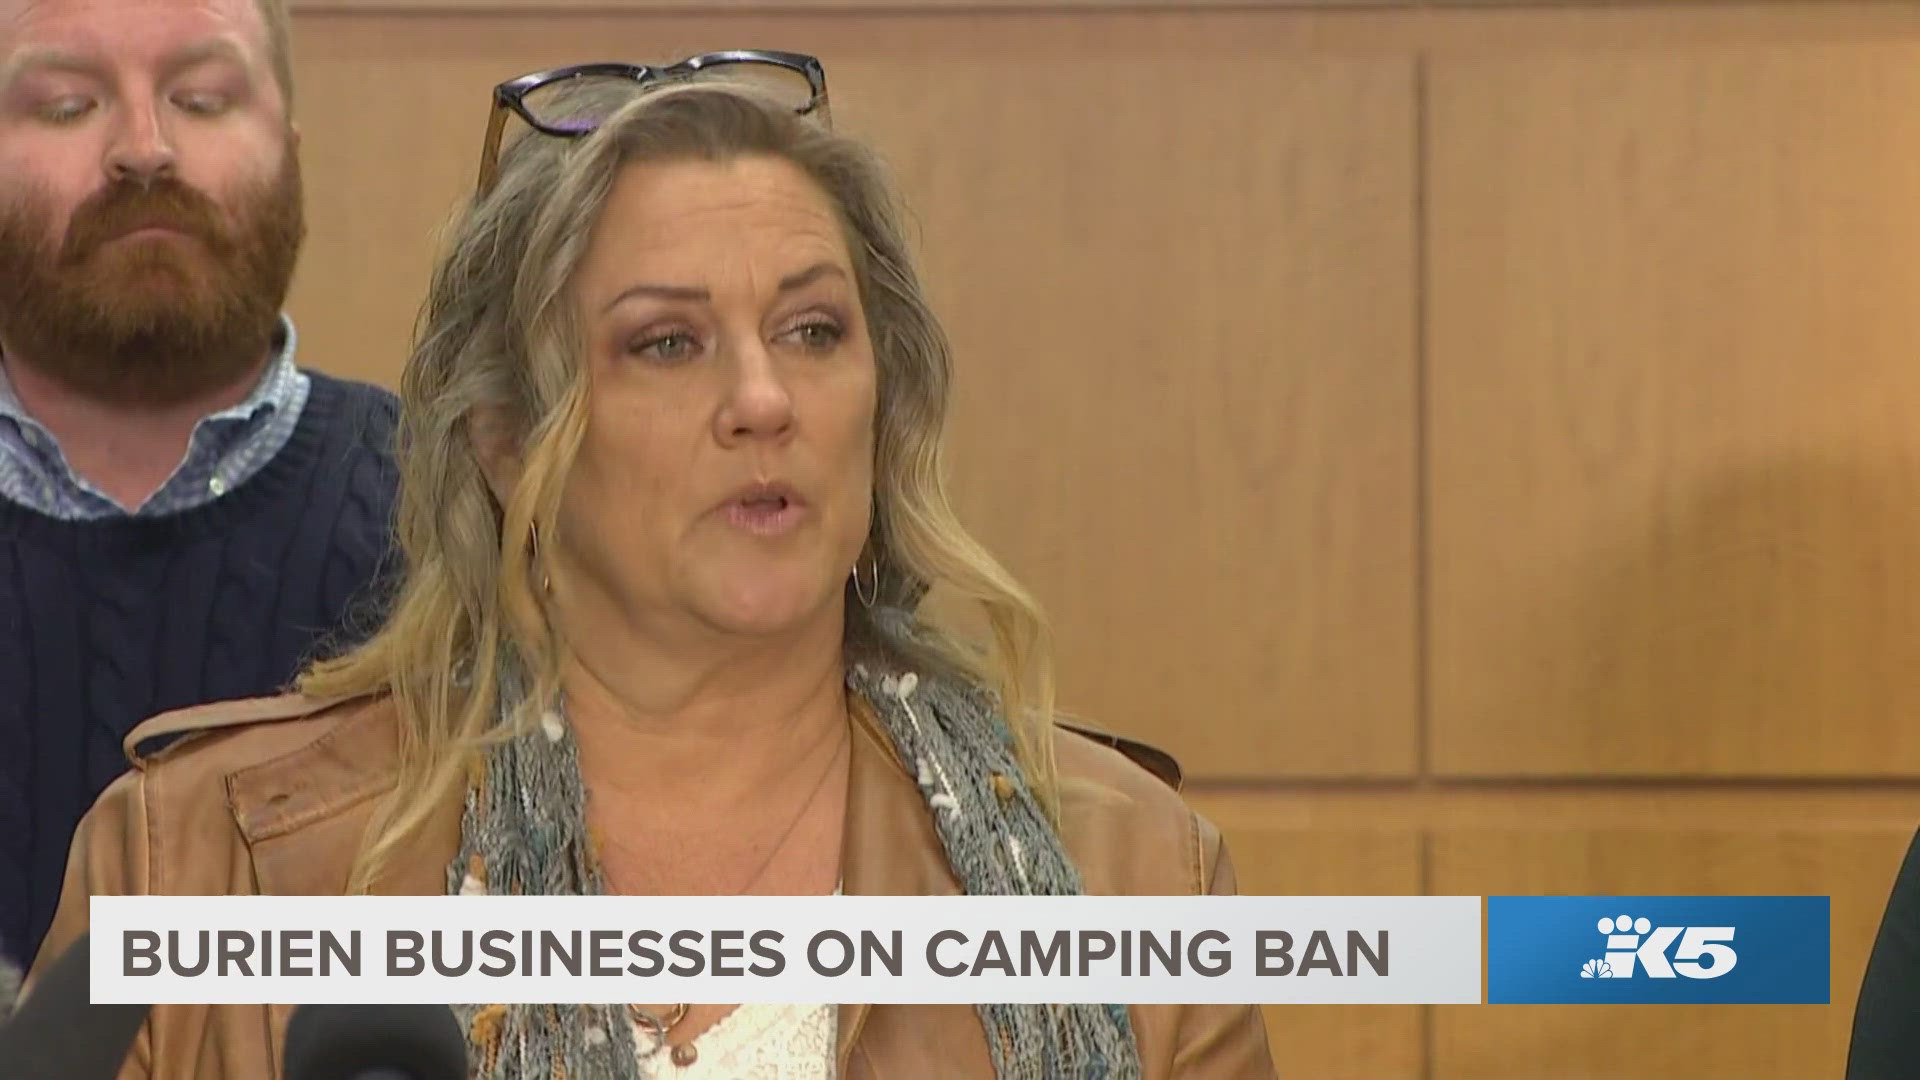 Rebecca Zielinski, co-owner of home goods store Sitka Living, urged the King County Sheriff's Office to enforce the city's camping ban.